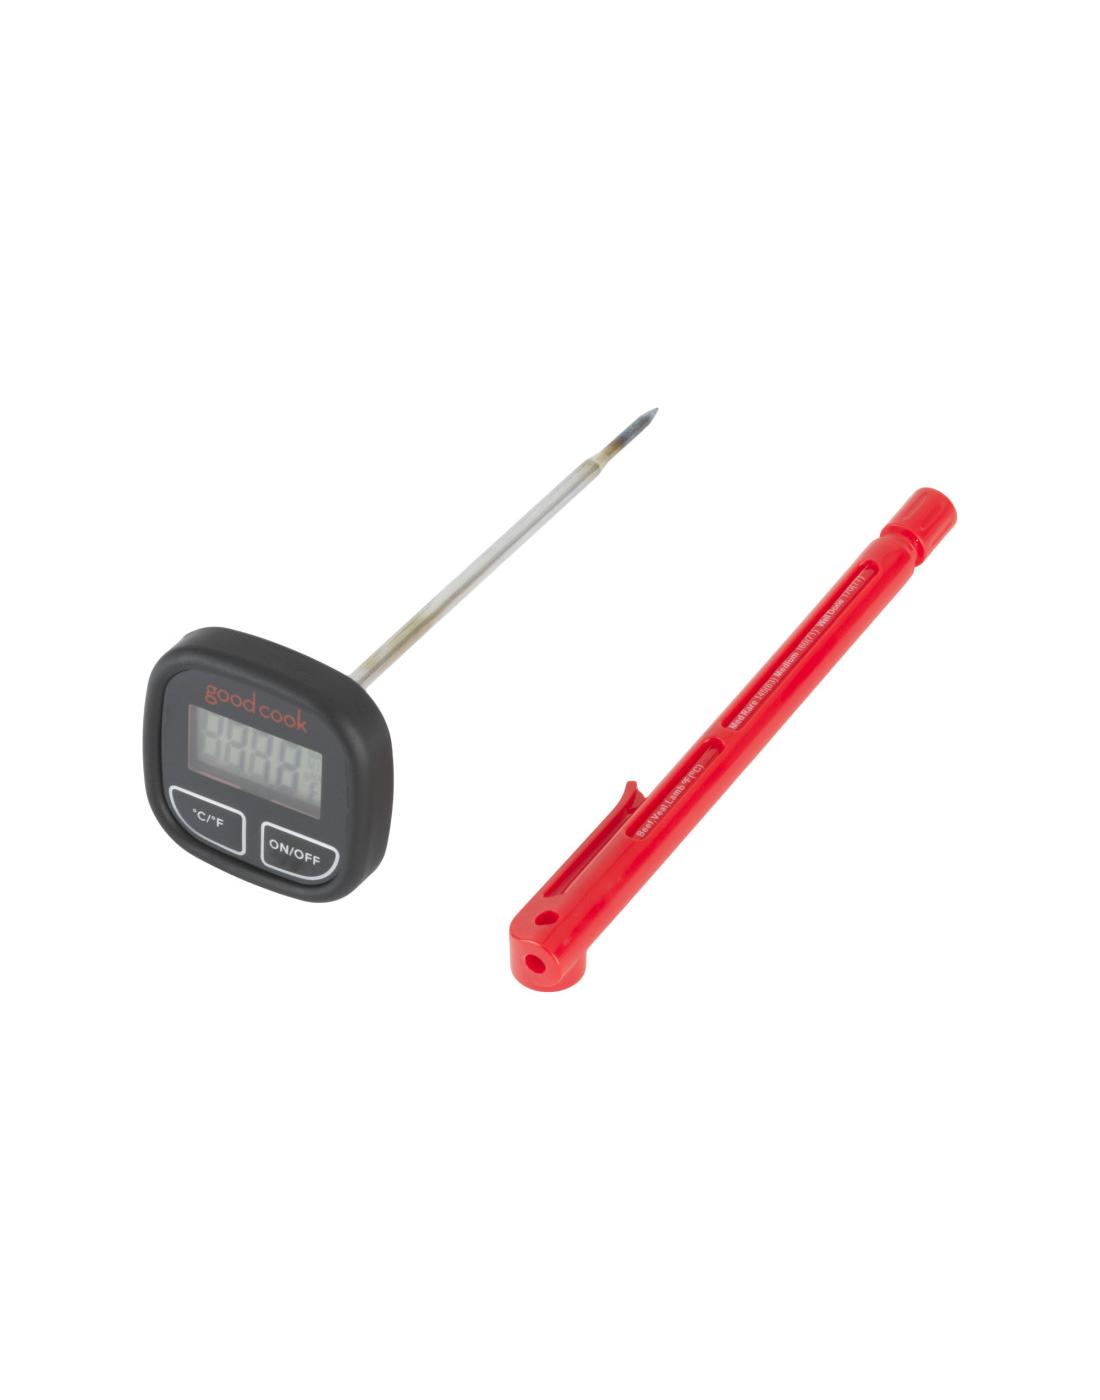 GoodCook Touch Digital Instant Read Thermometer; image 5 of 5